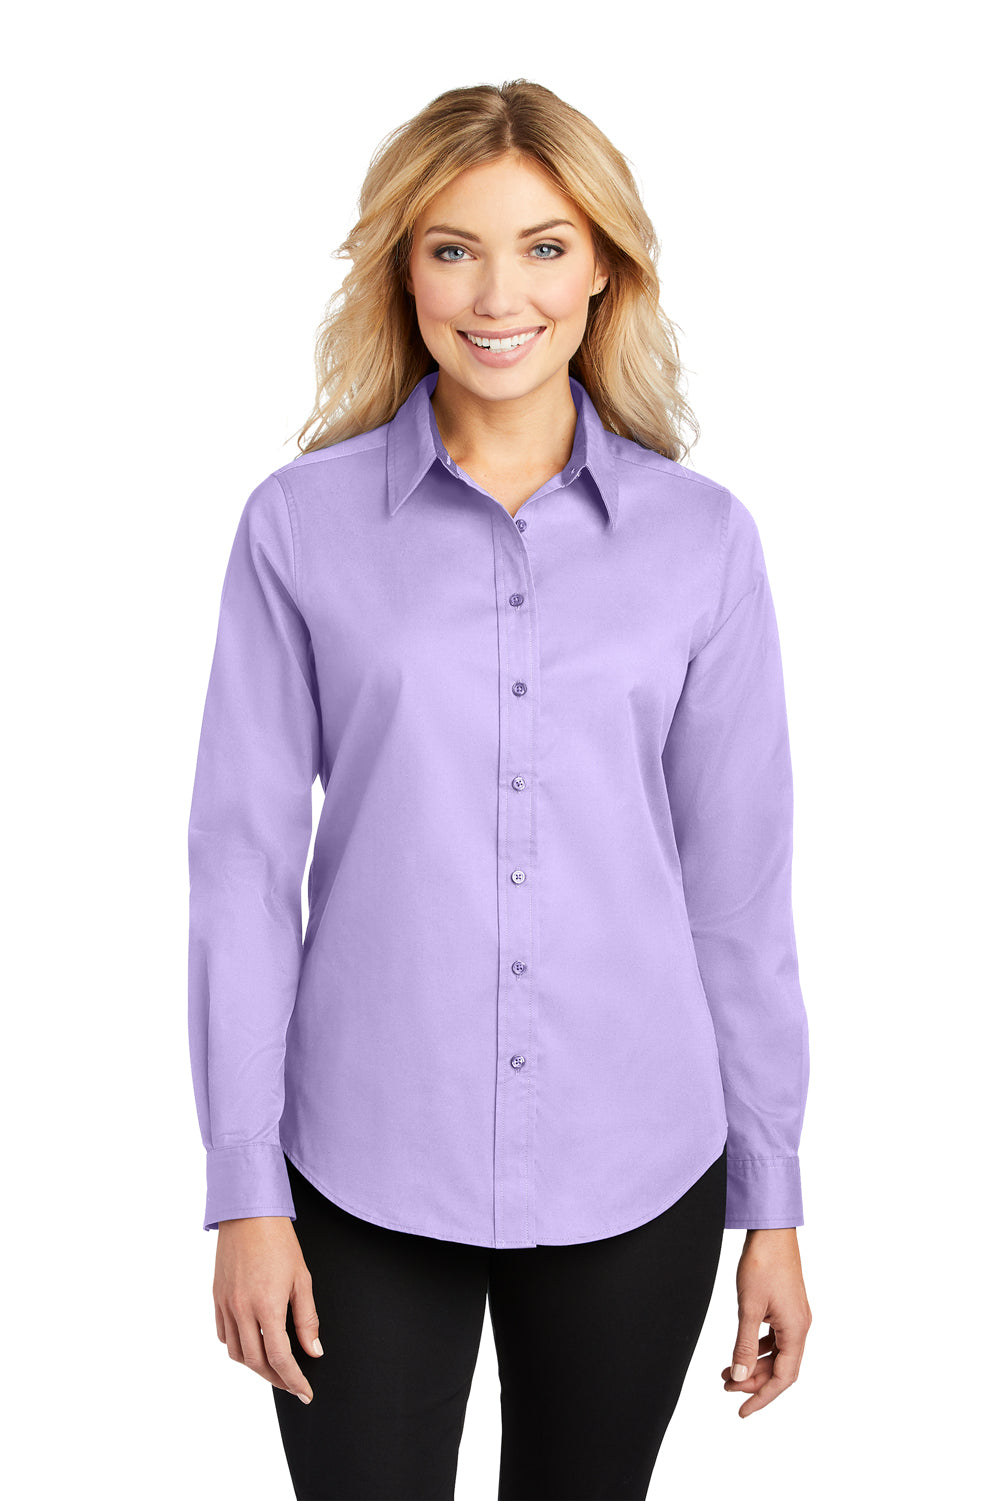 Port Authority L608 Womens Easy Care Wrinkle Resistant Long Sleeve Button Down Shirt Bright Lavender Purple Front